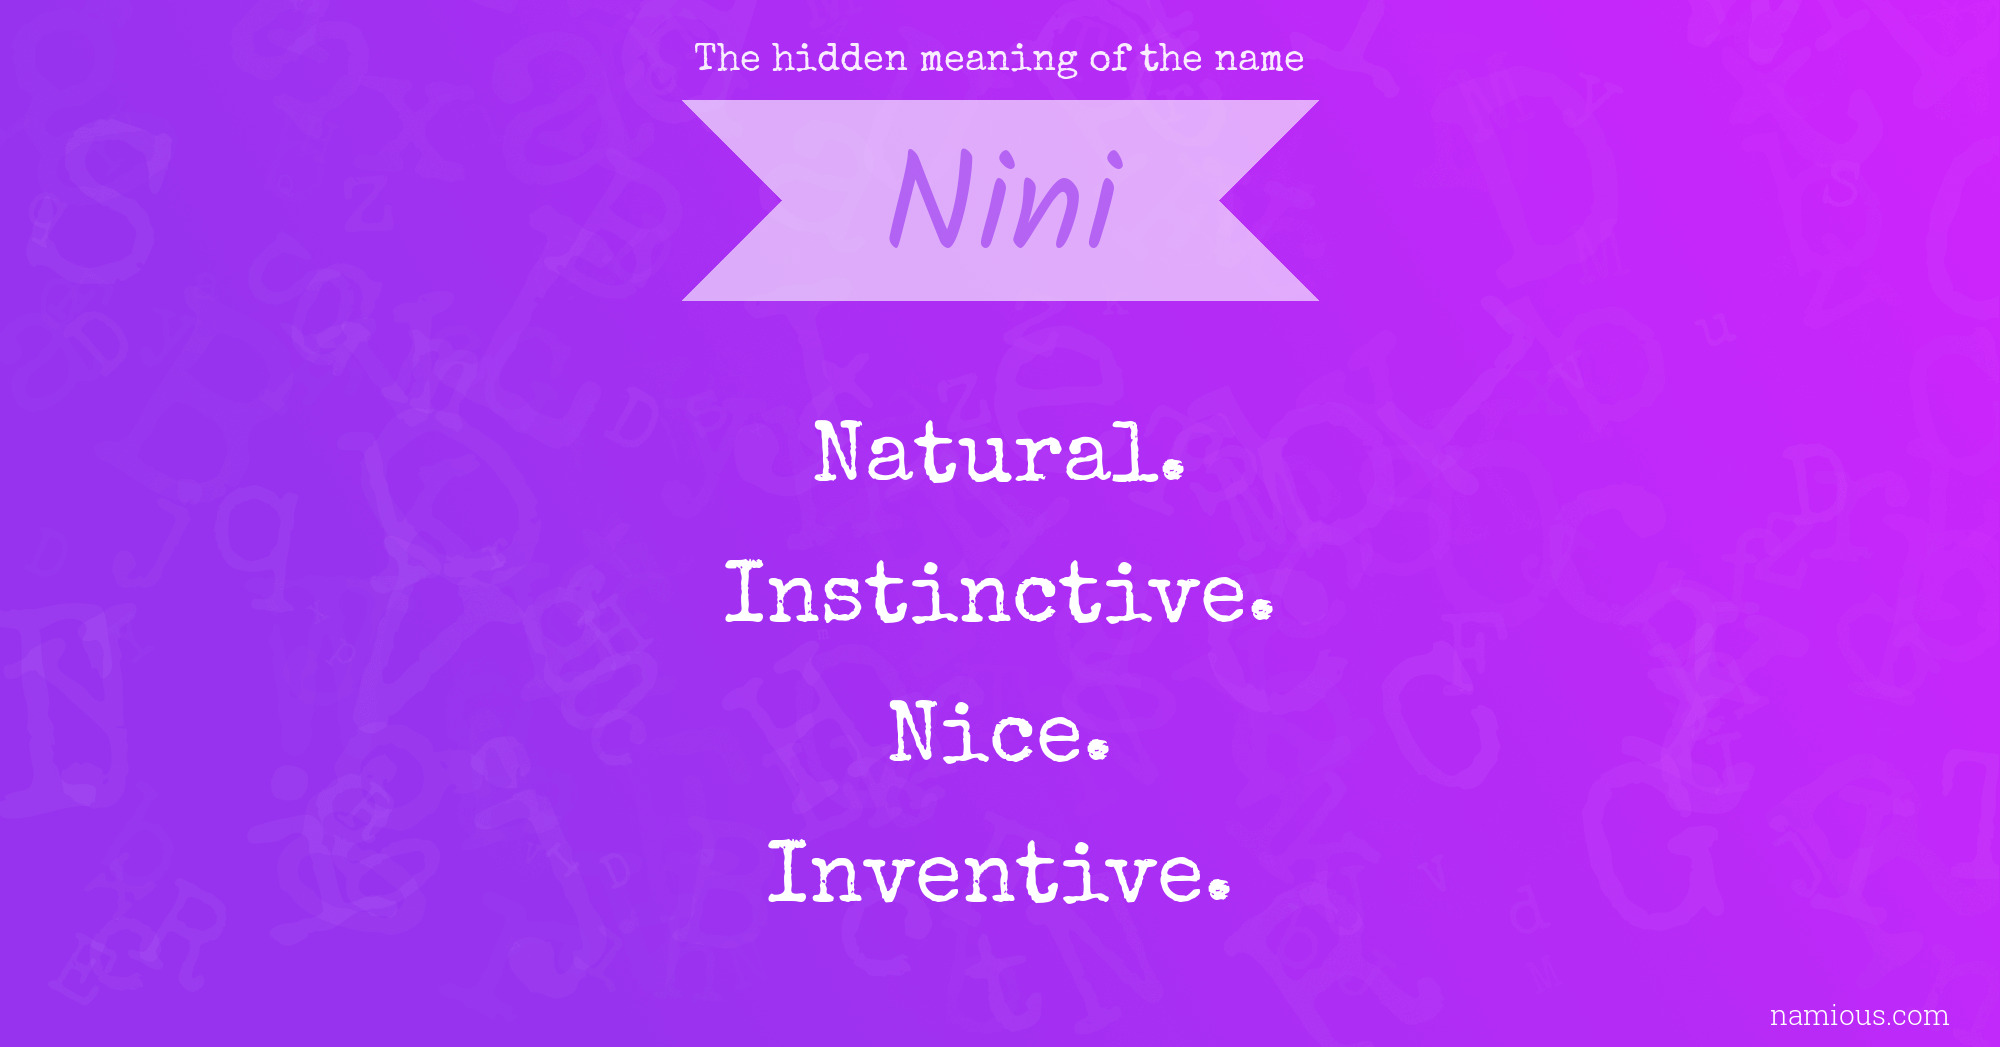 The hidden meaning of the name Nini